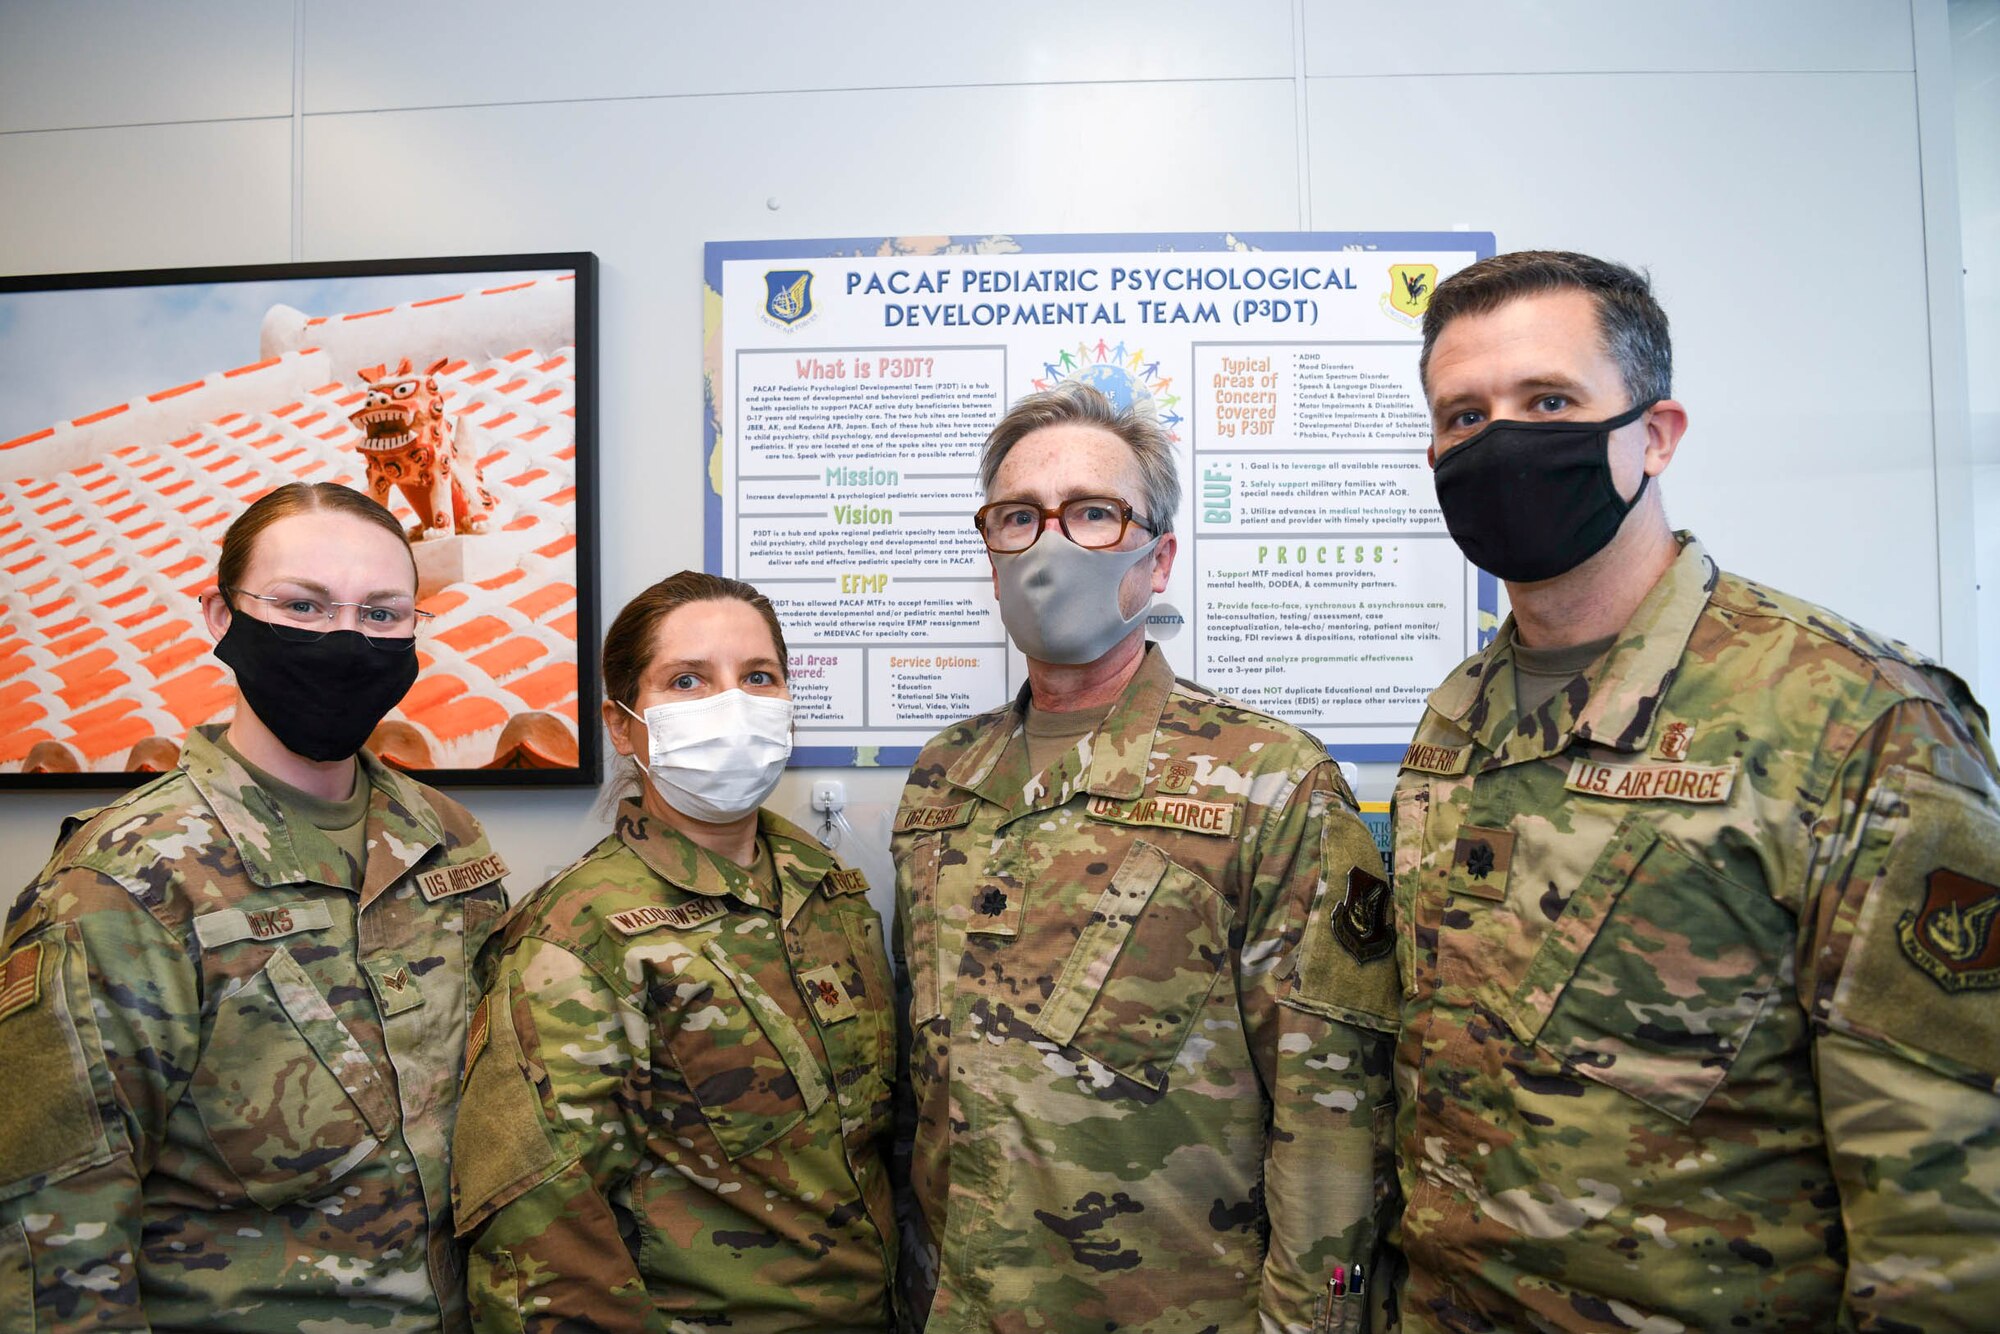 Members of the PACAF Pediatric Psychological Developmental Team demonstrate a typical day in the office.